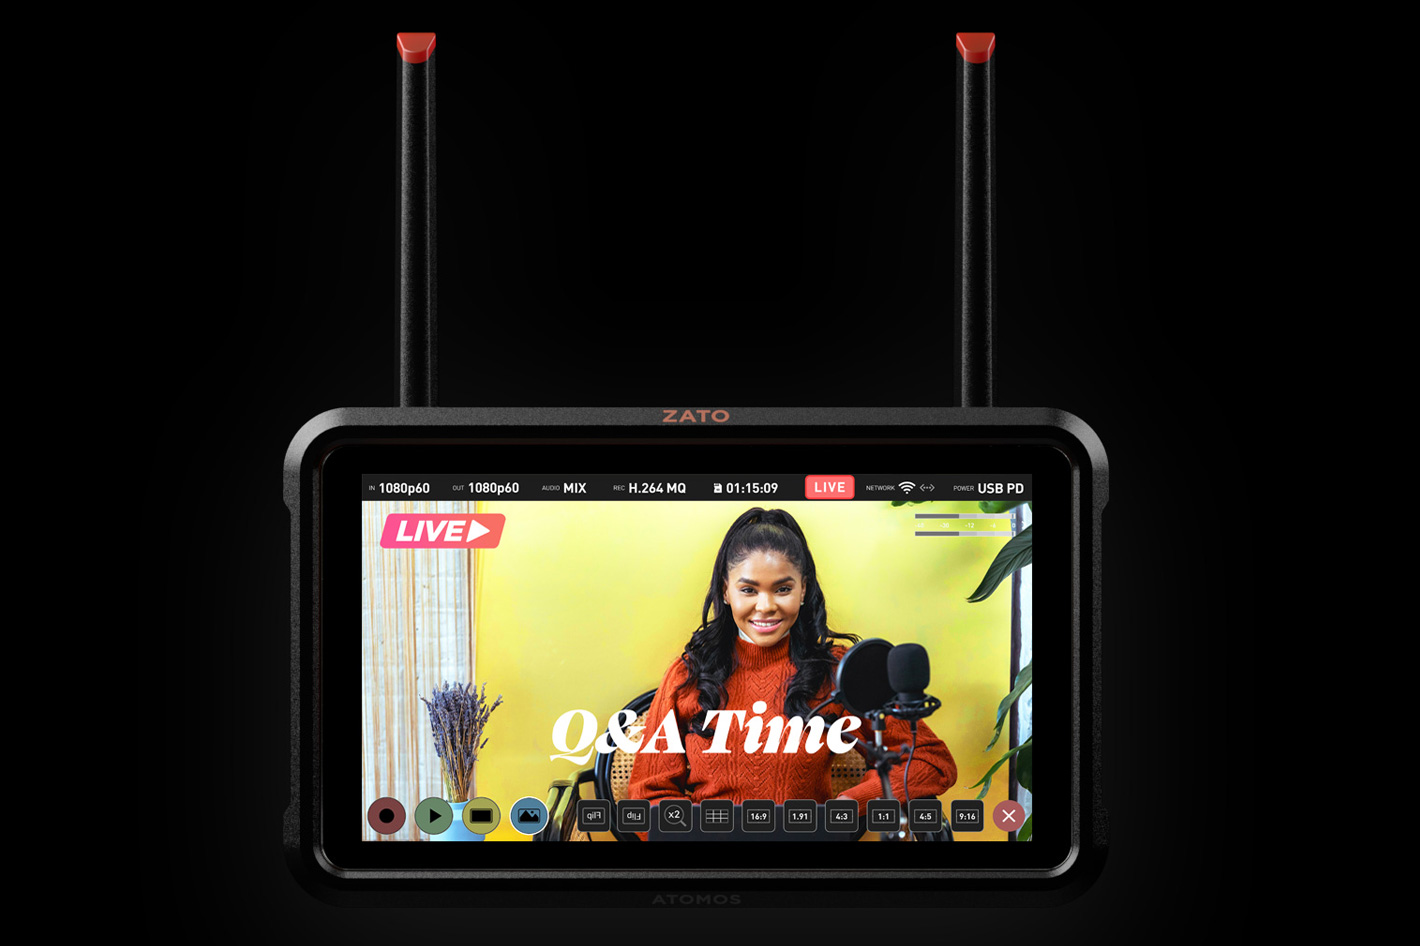 ATOMOS to show its new products at Adobe MAX 2022